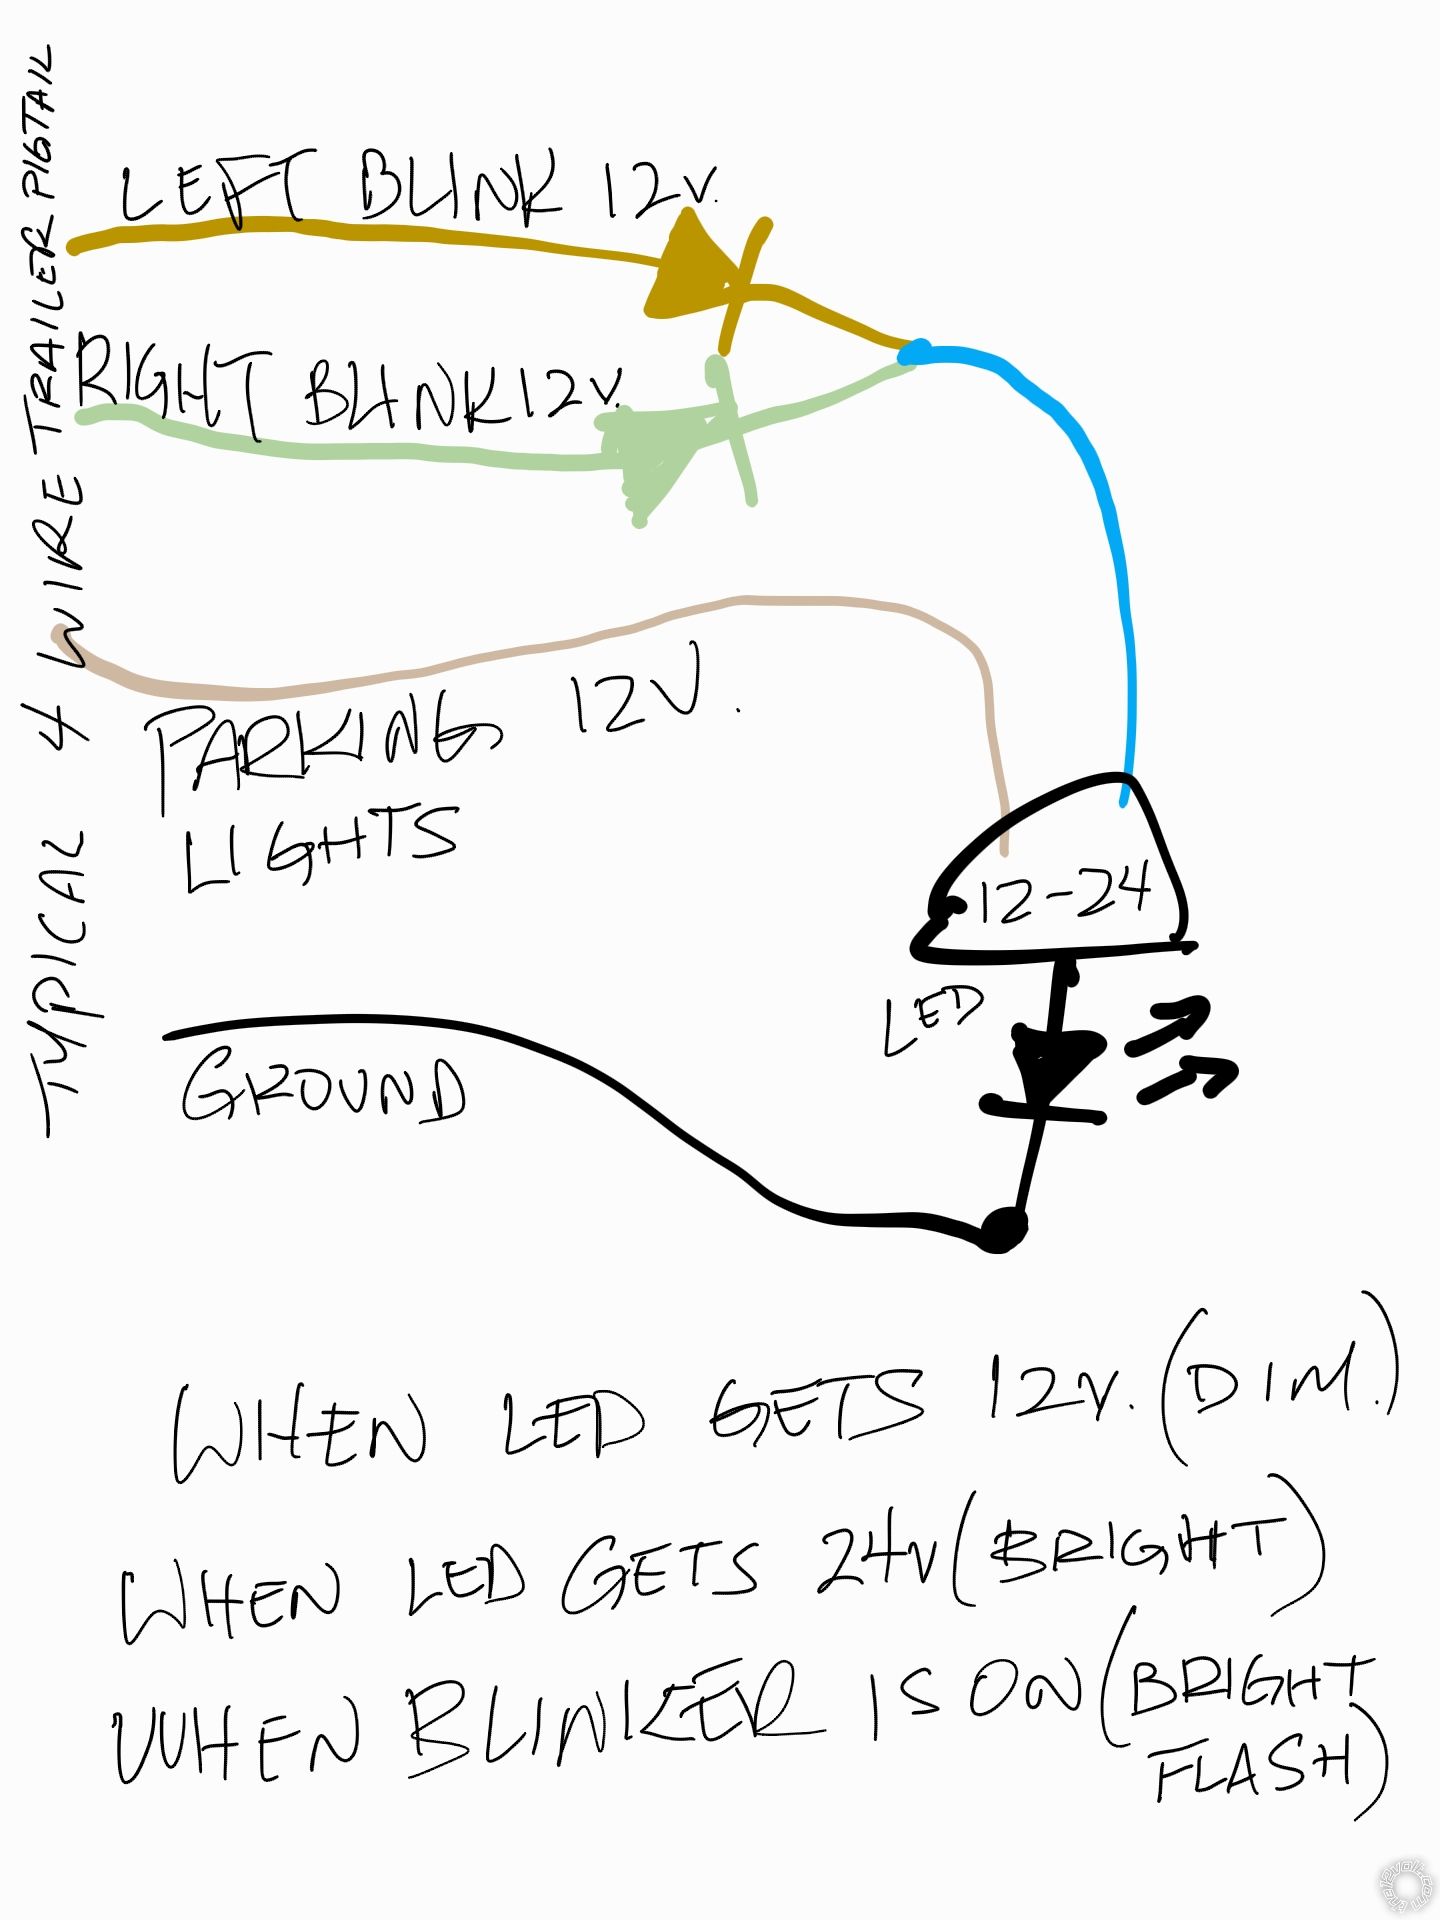 Two 12V Signals to Allow 12V to Pass? -- posted image.